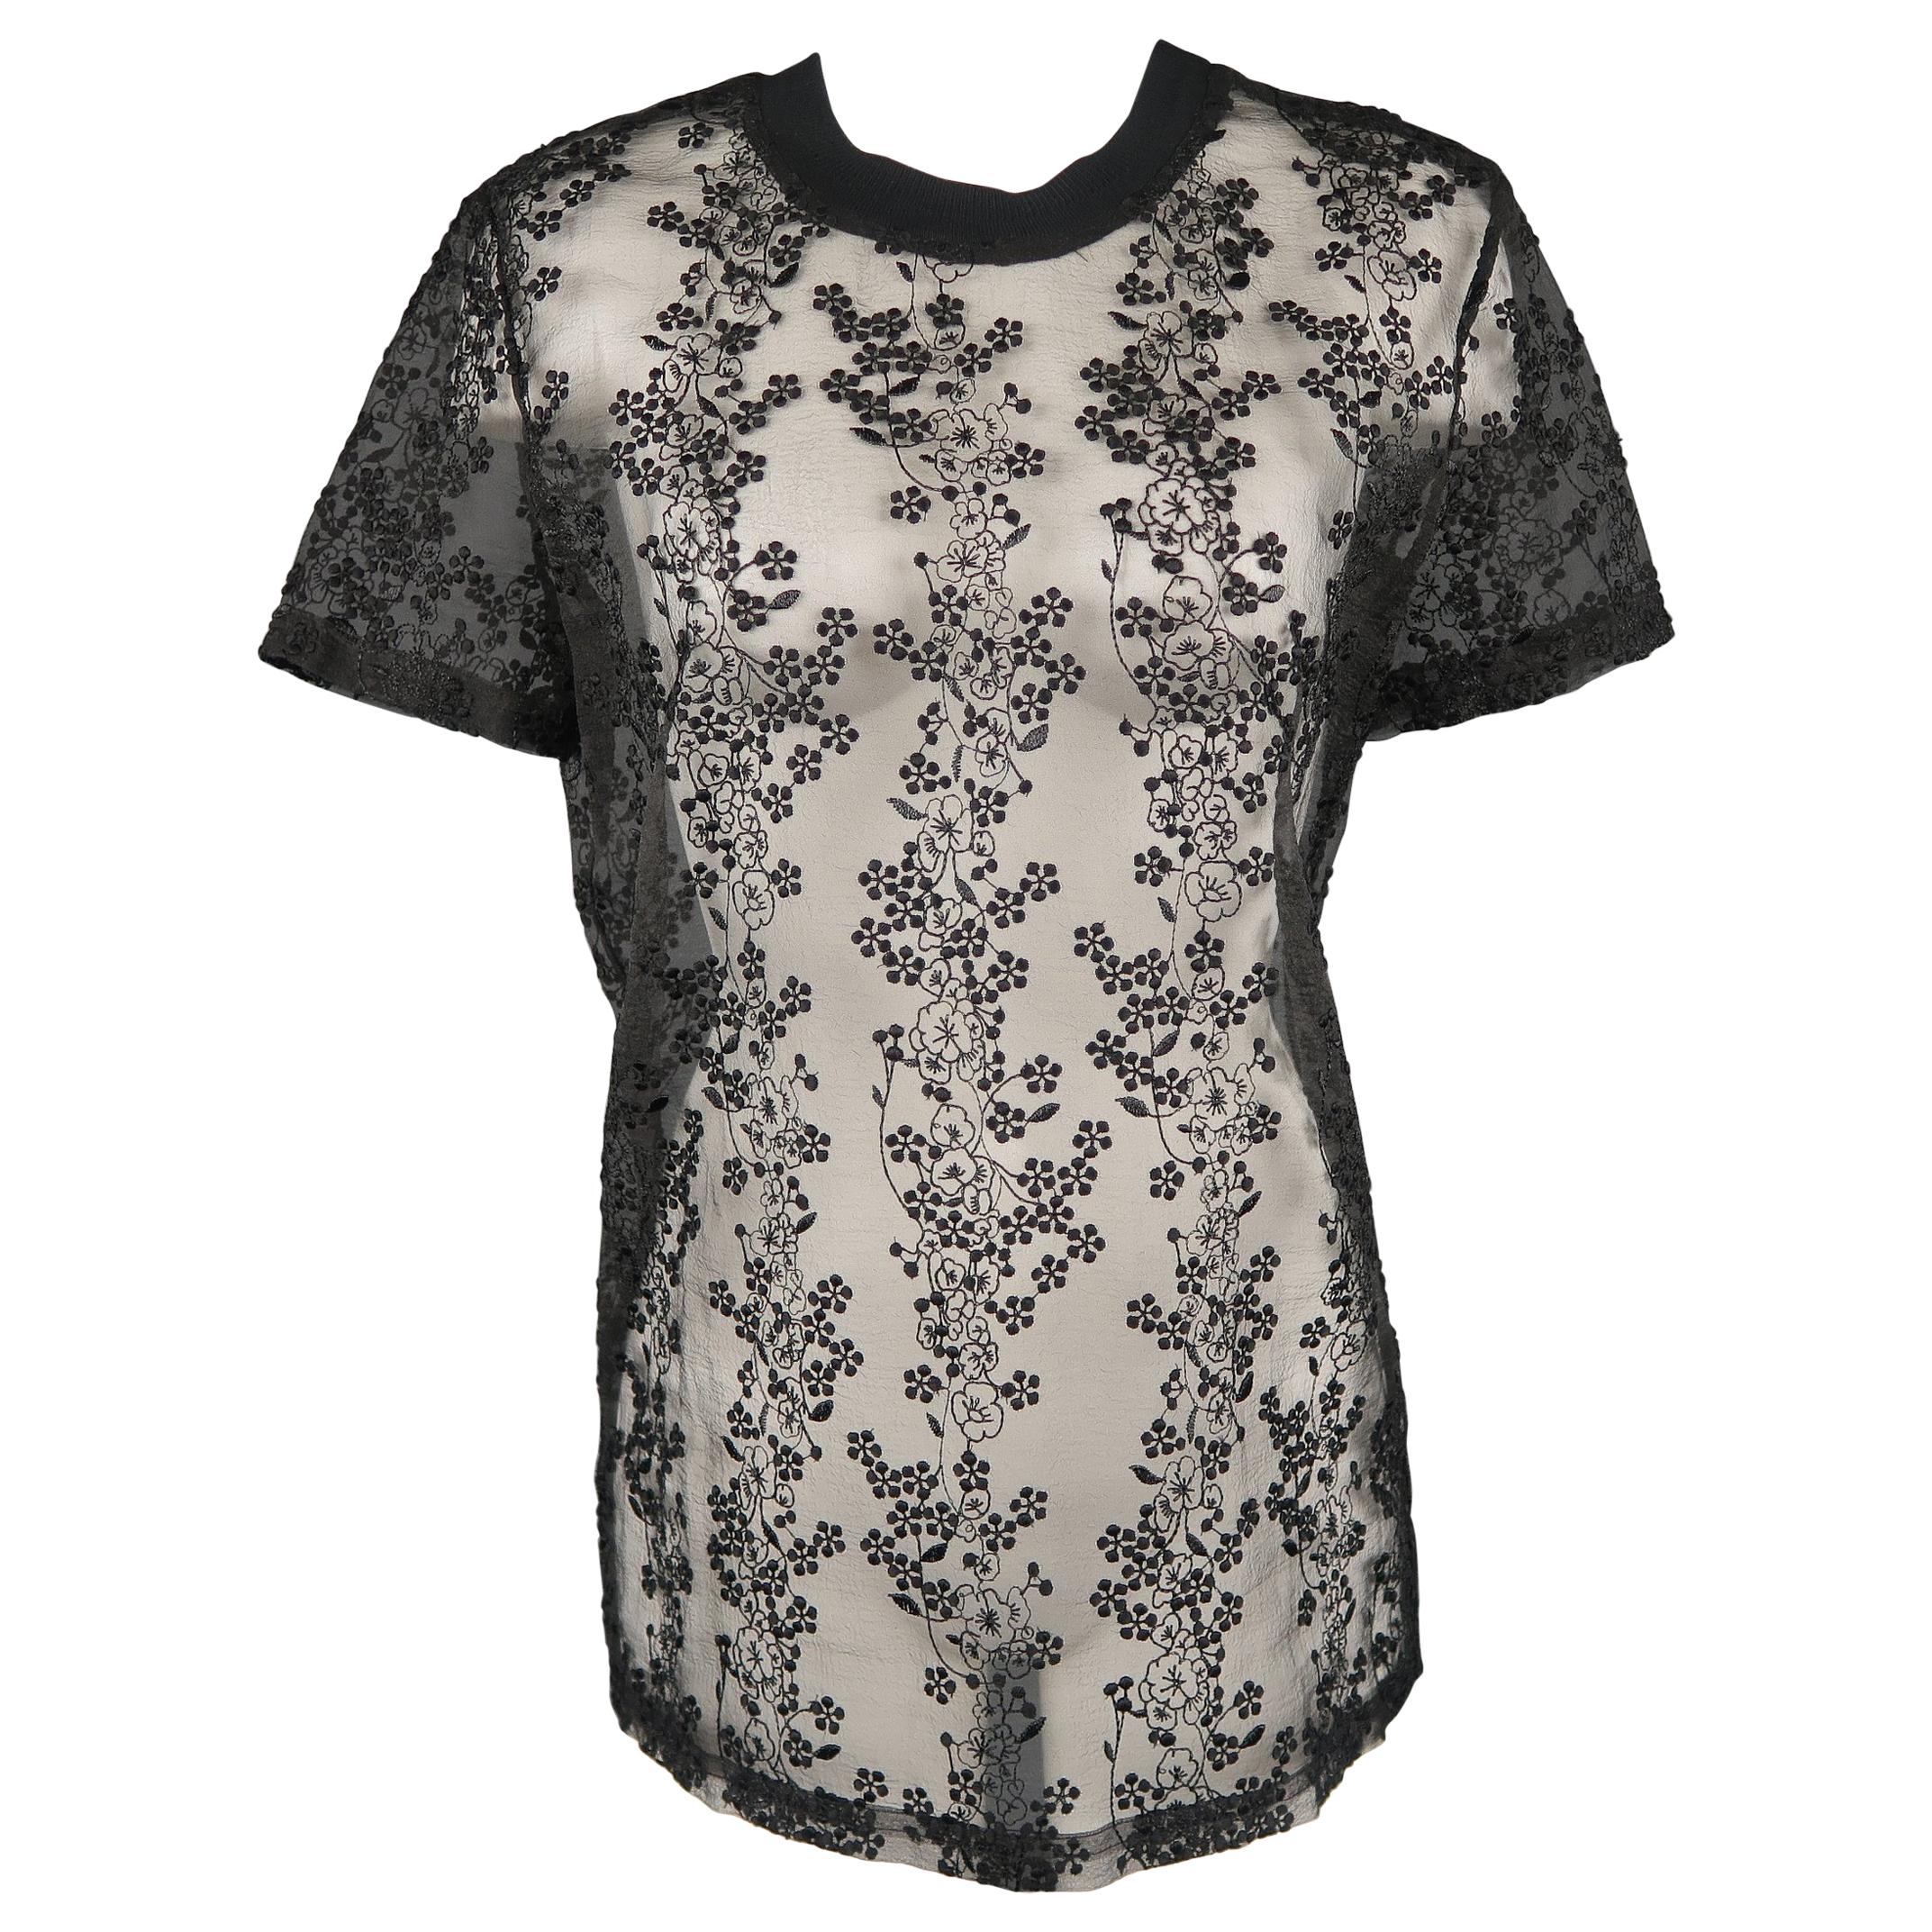 CARVEN Size 2 Black Floral Lace Embroidered Organza T-Shirt Tee Blouse